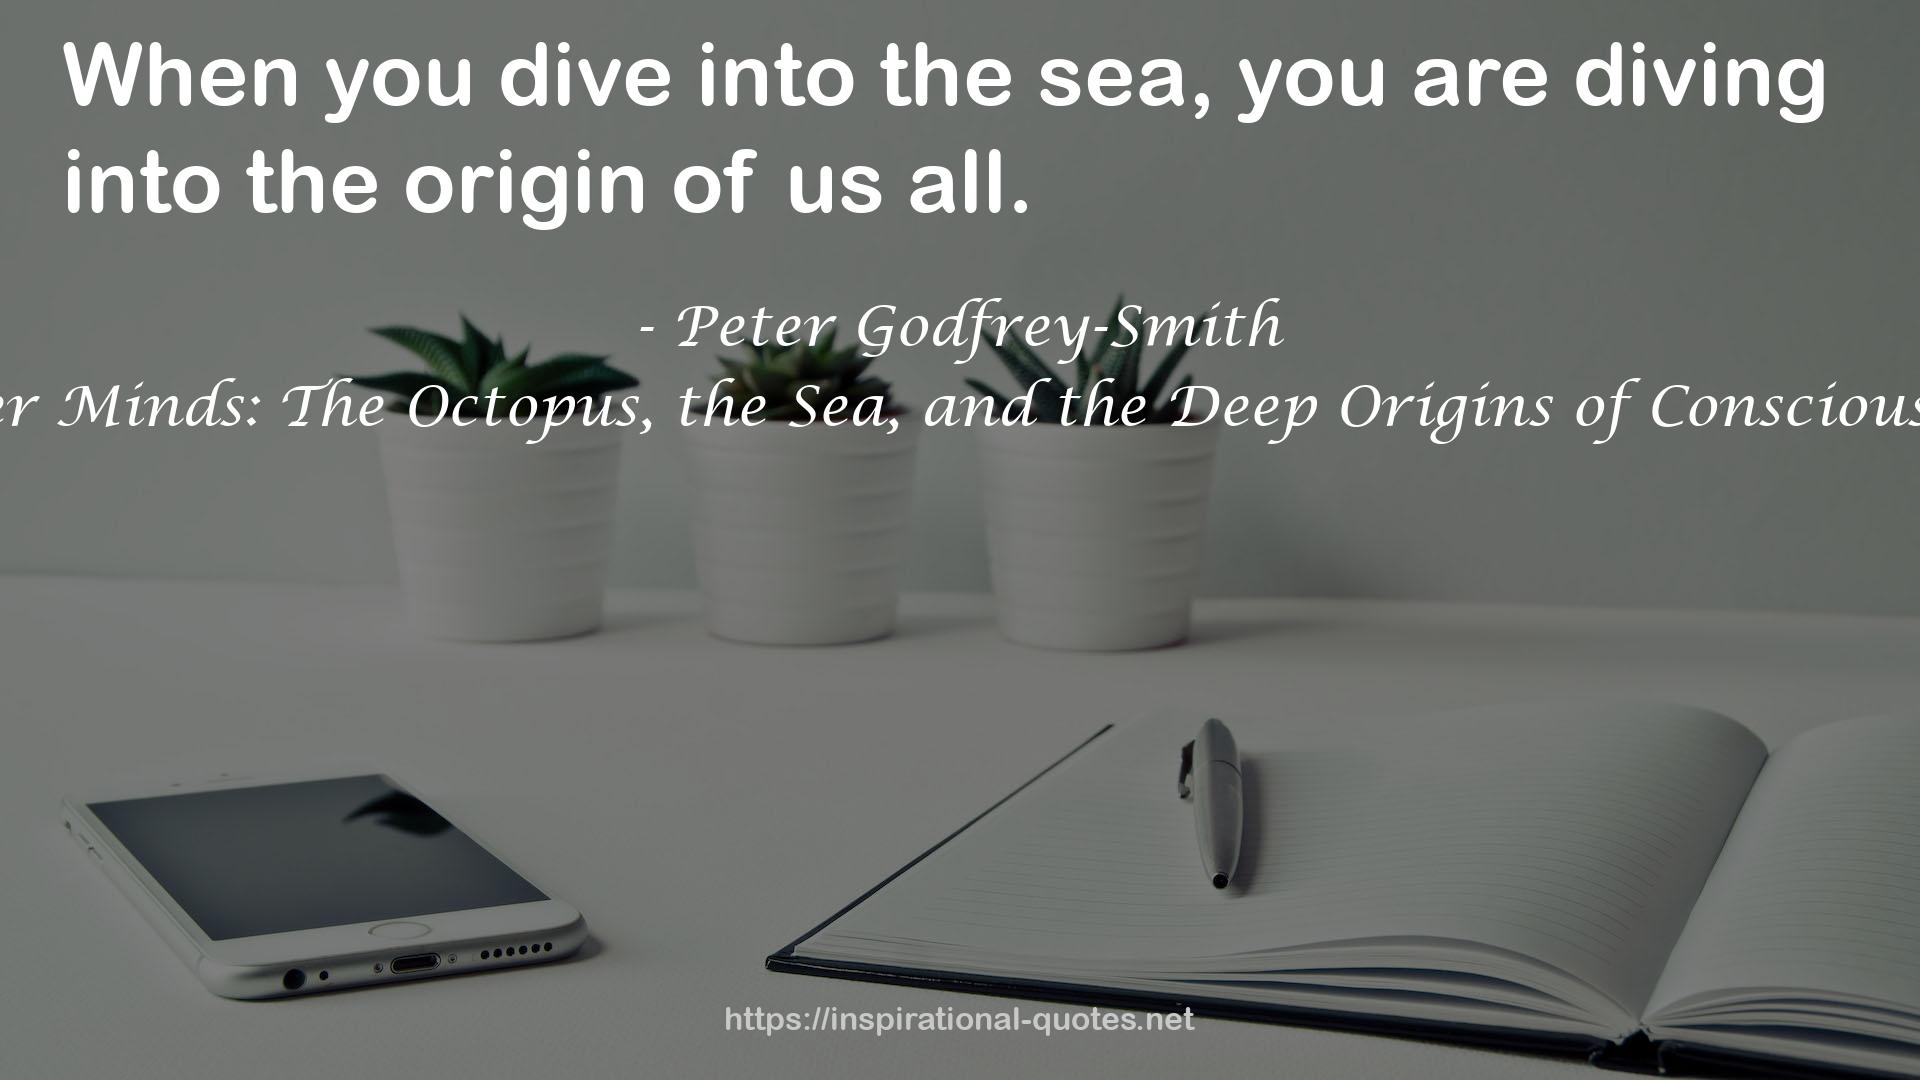 Other Minds: The Octopus, the Sea, and the Deep Origins of Consciousness QUOTES